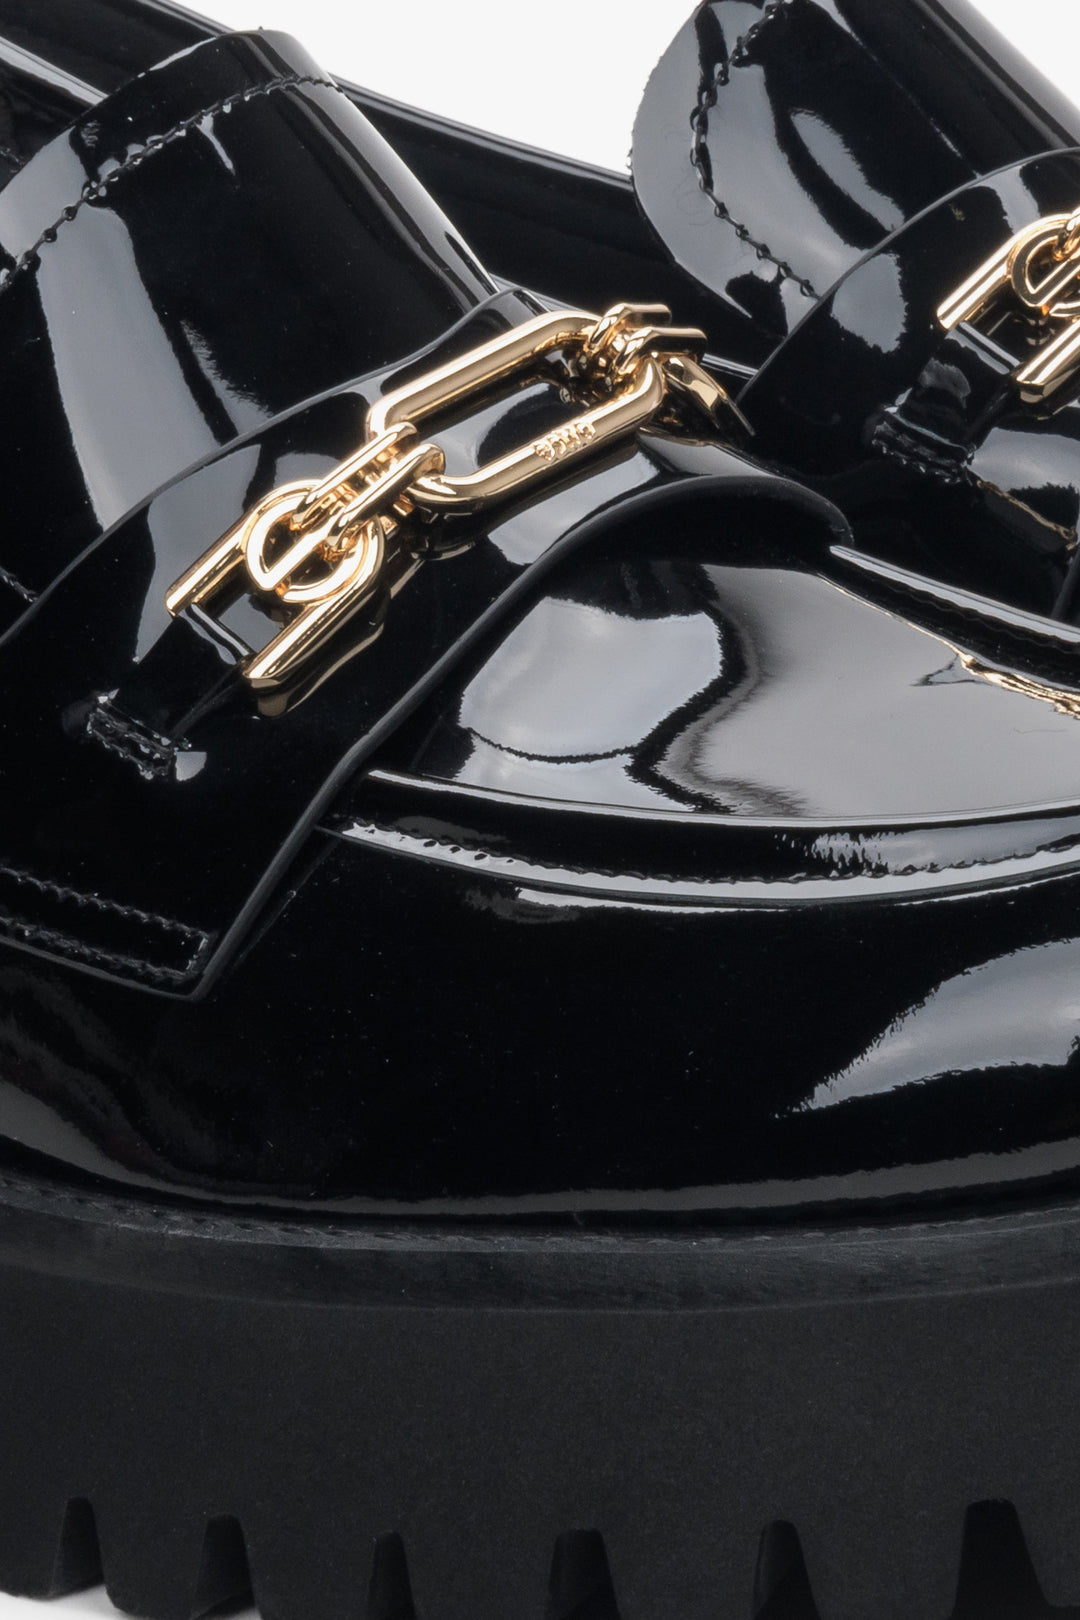 Women's black patent leather moccasins by Estro - close-up on the gold buckle.